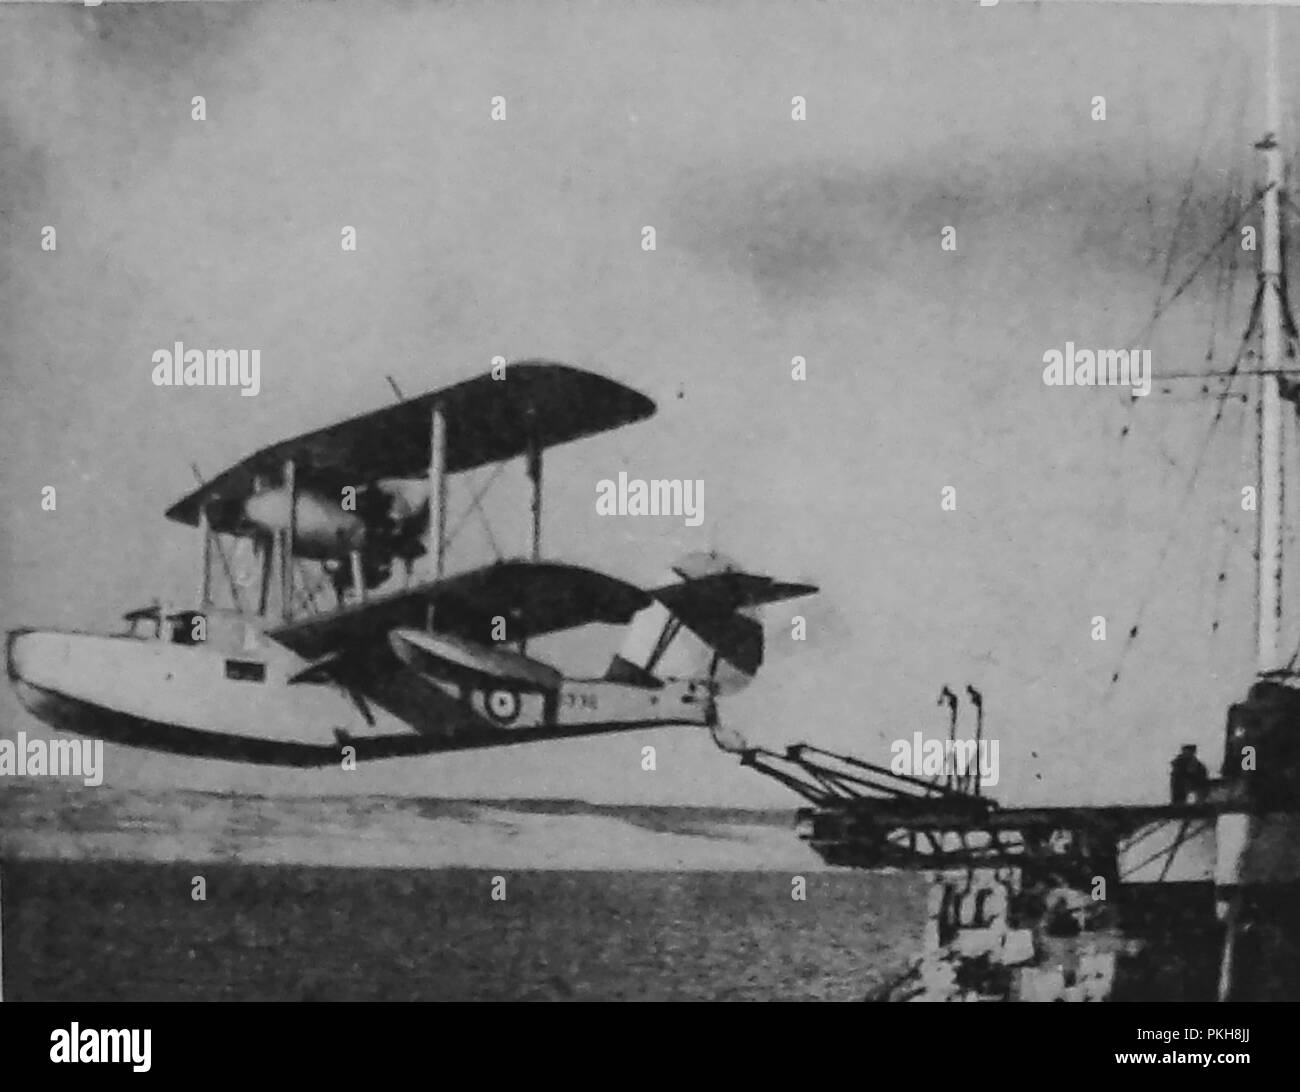 An old printed photograph showing an experimental aircraft carrier using a British biplane  (Seaplane) launched from a warship in 1933 Stock Photo